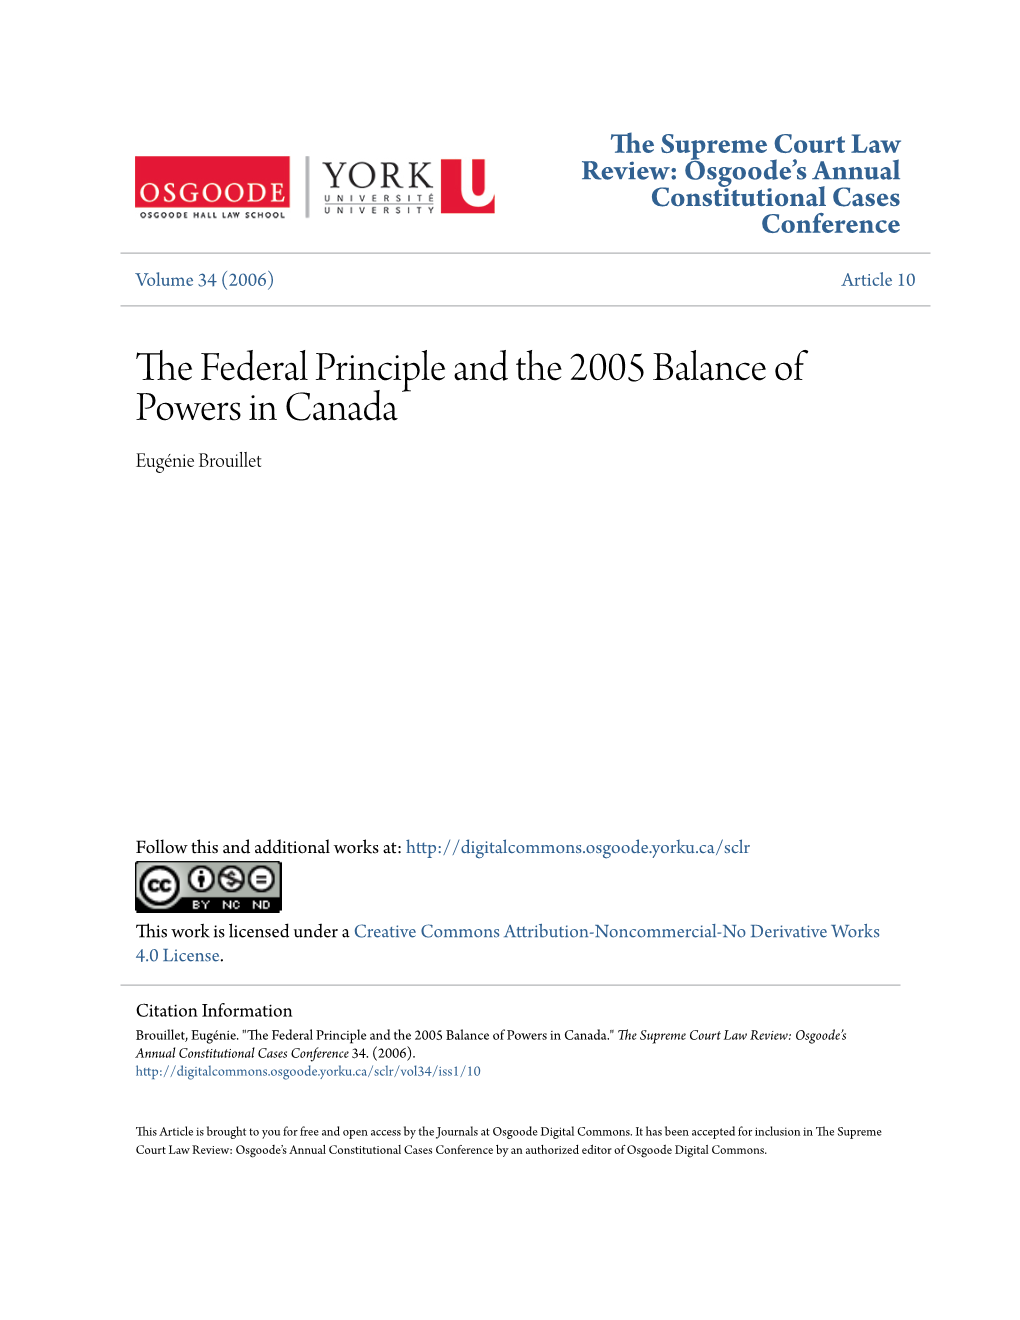 The Federal Principle and the 2005 Balance of Powers in Canada